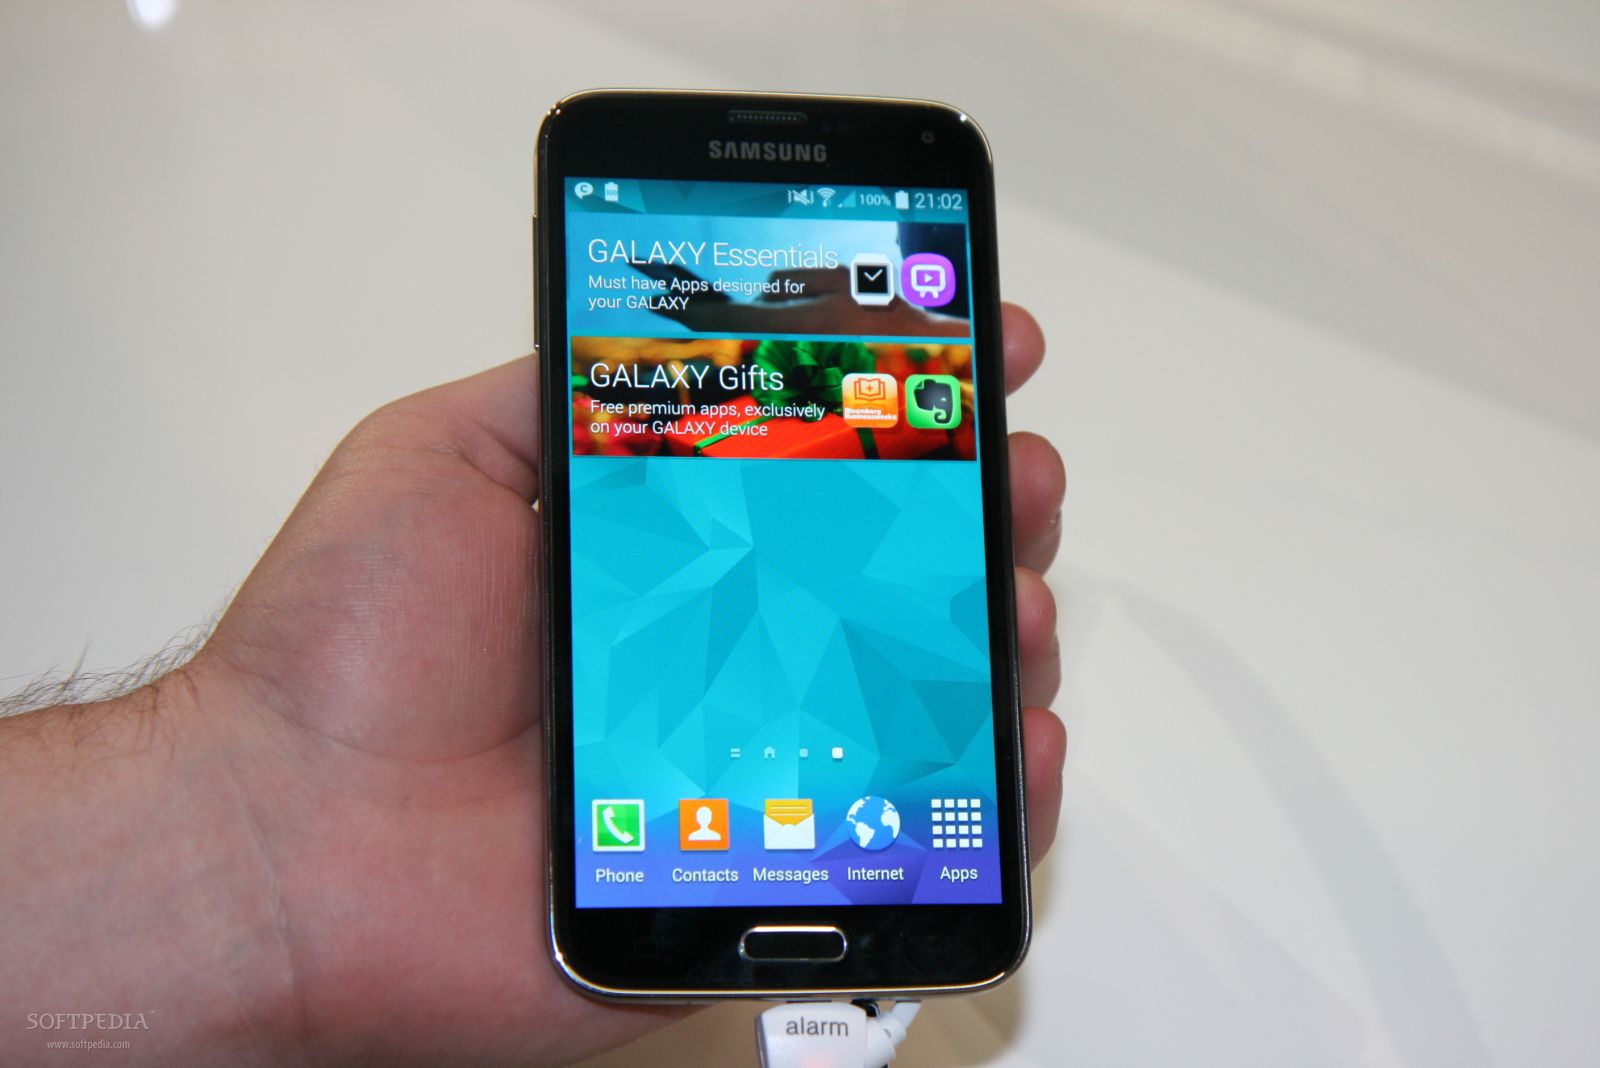 Watch: Samsung Galaxy S5 Introduction Video